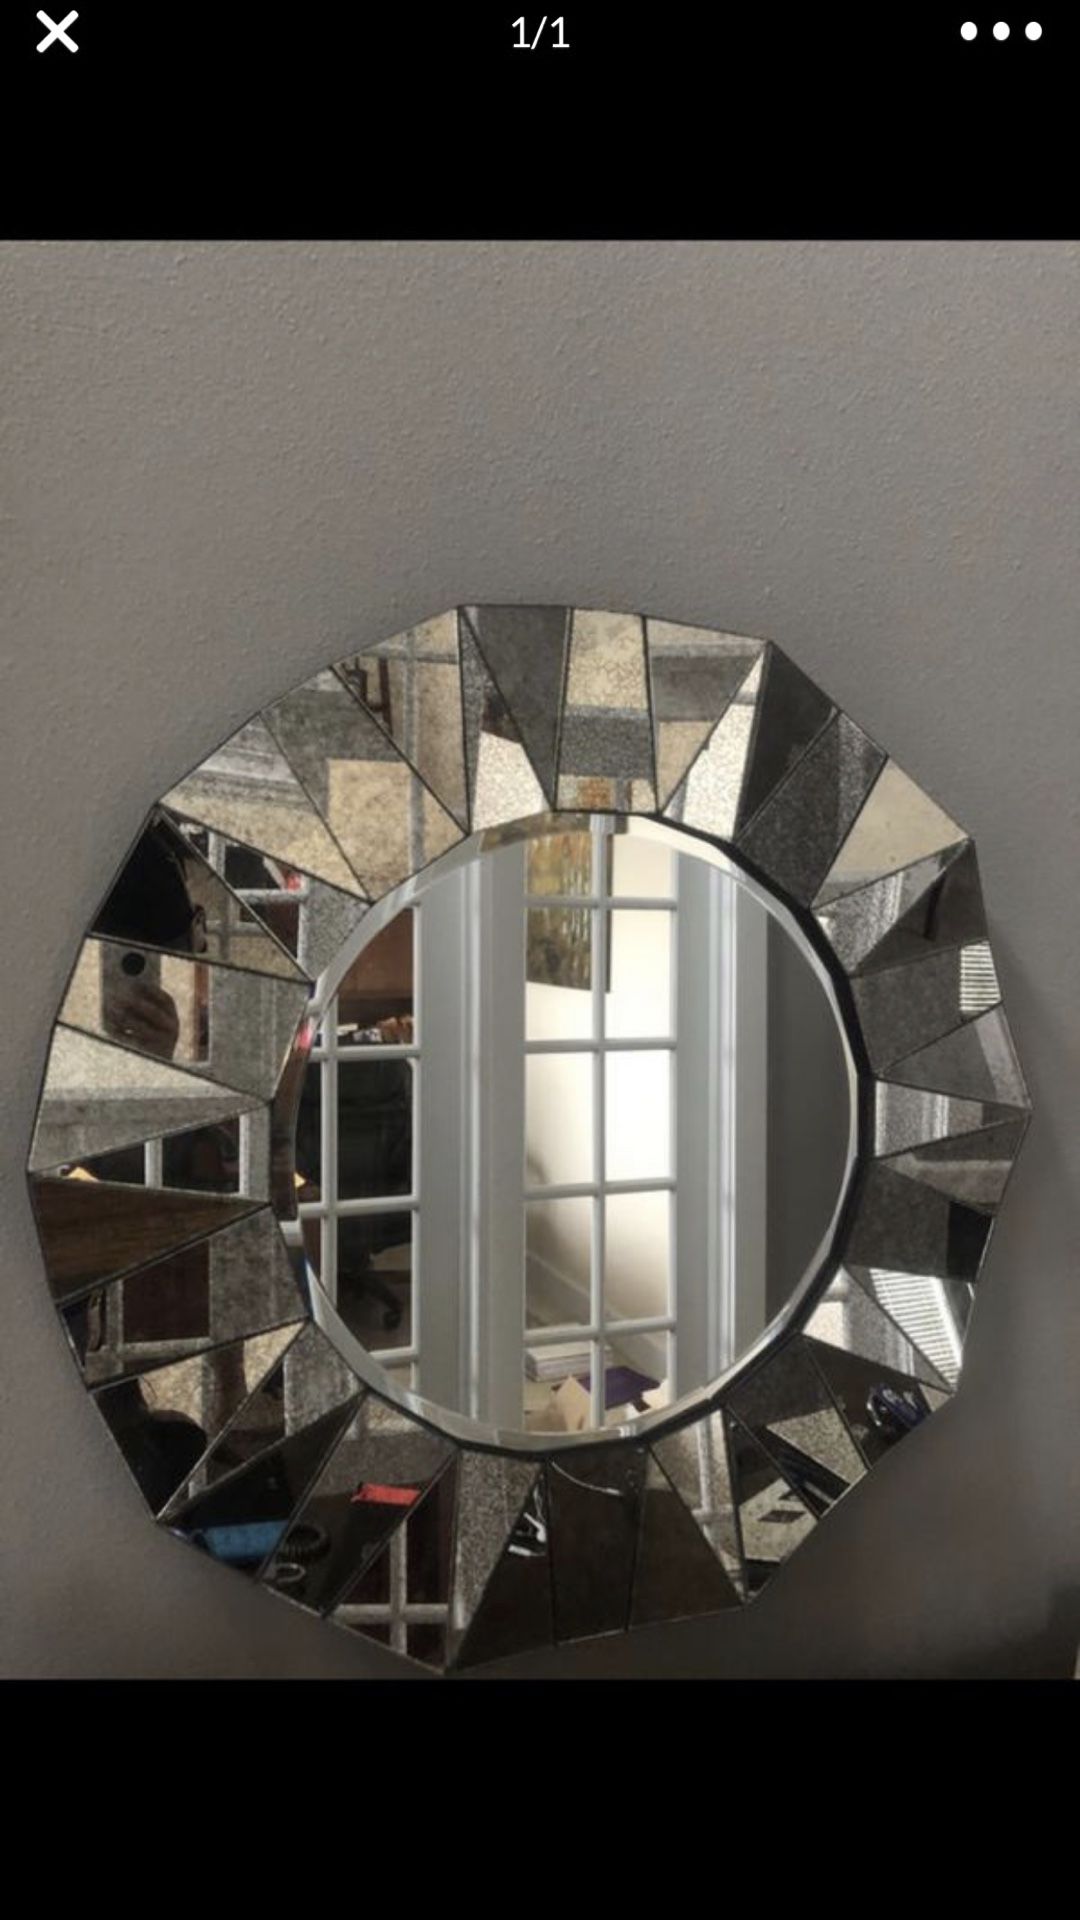 Wall mirror from Zgallery